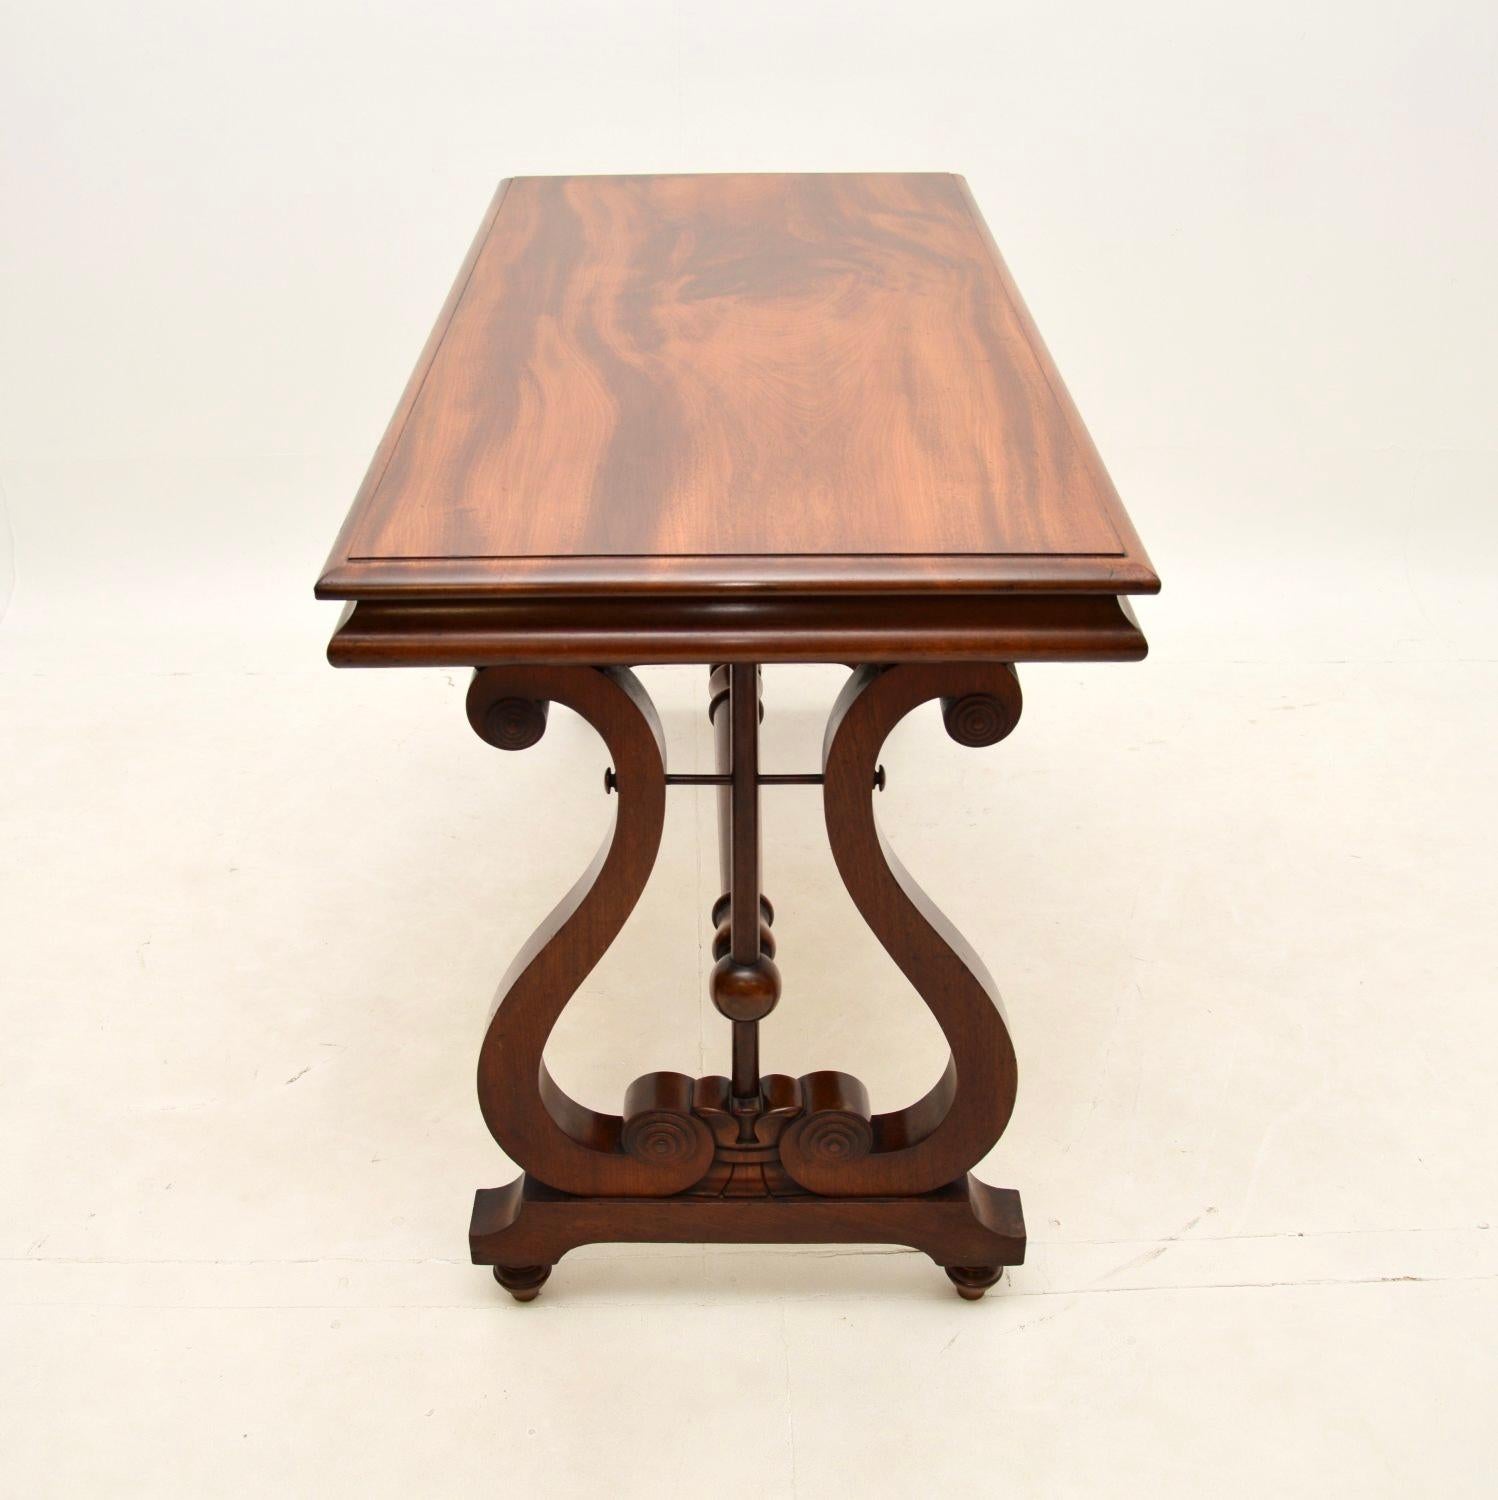 Early 19th Century Antique Regency Period Library Table / Desk For Sale